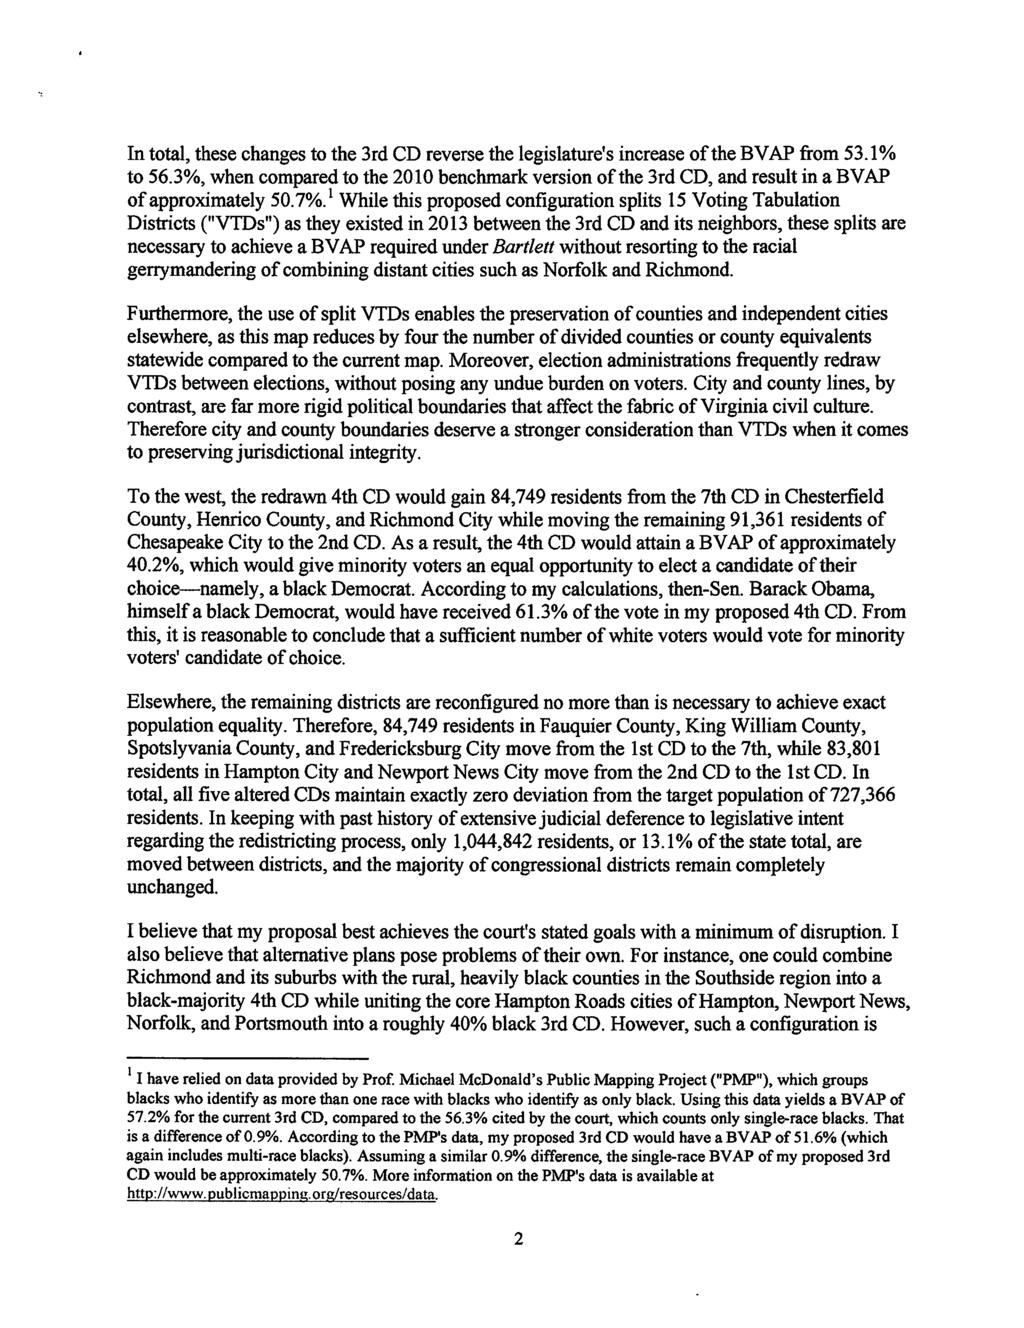 Case 3:13-cv-00678-REP-LO-AD Document 228 Filed 09/18/15 Page 2 of 3 PageID# 5336 In total, these changes to the 3rd CD reverse the legislature's increase of the BV AP from 53.1% to 56.